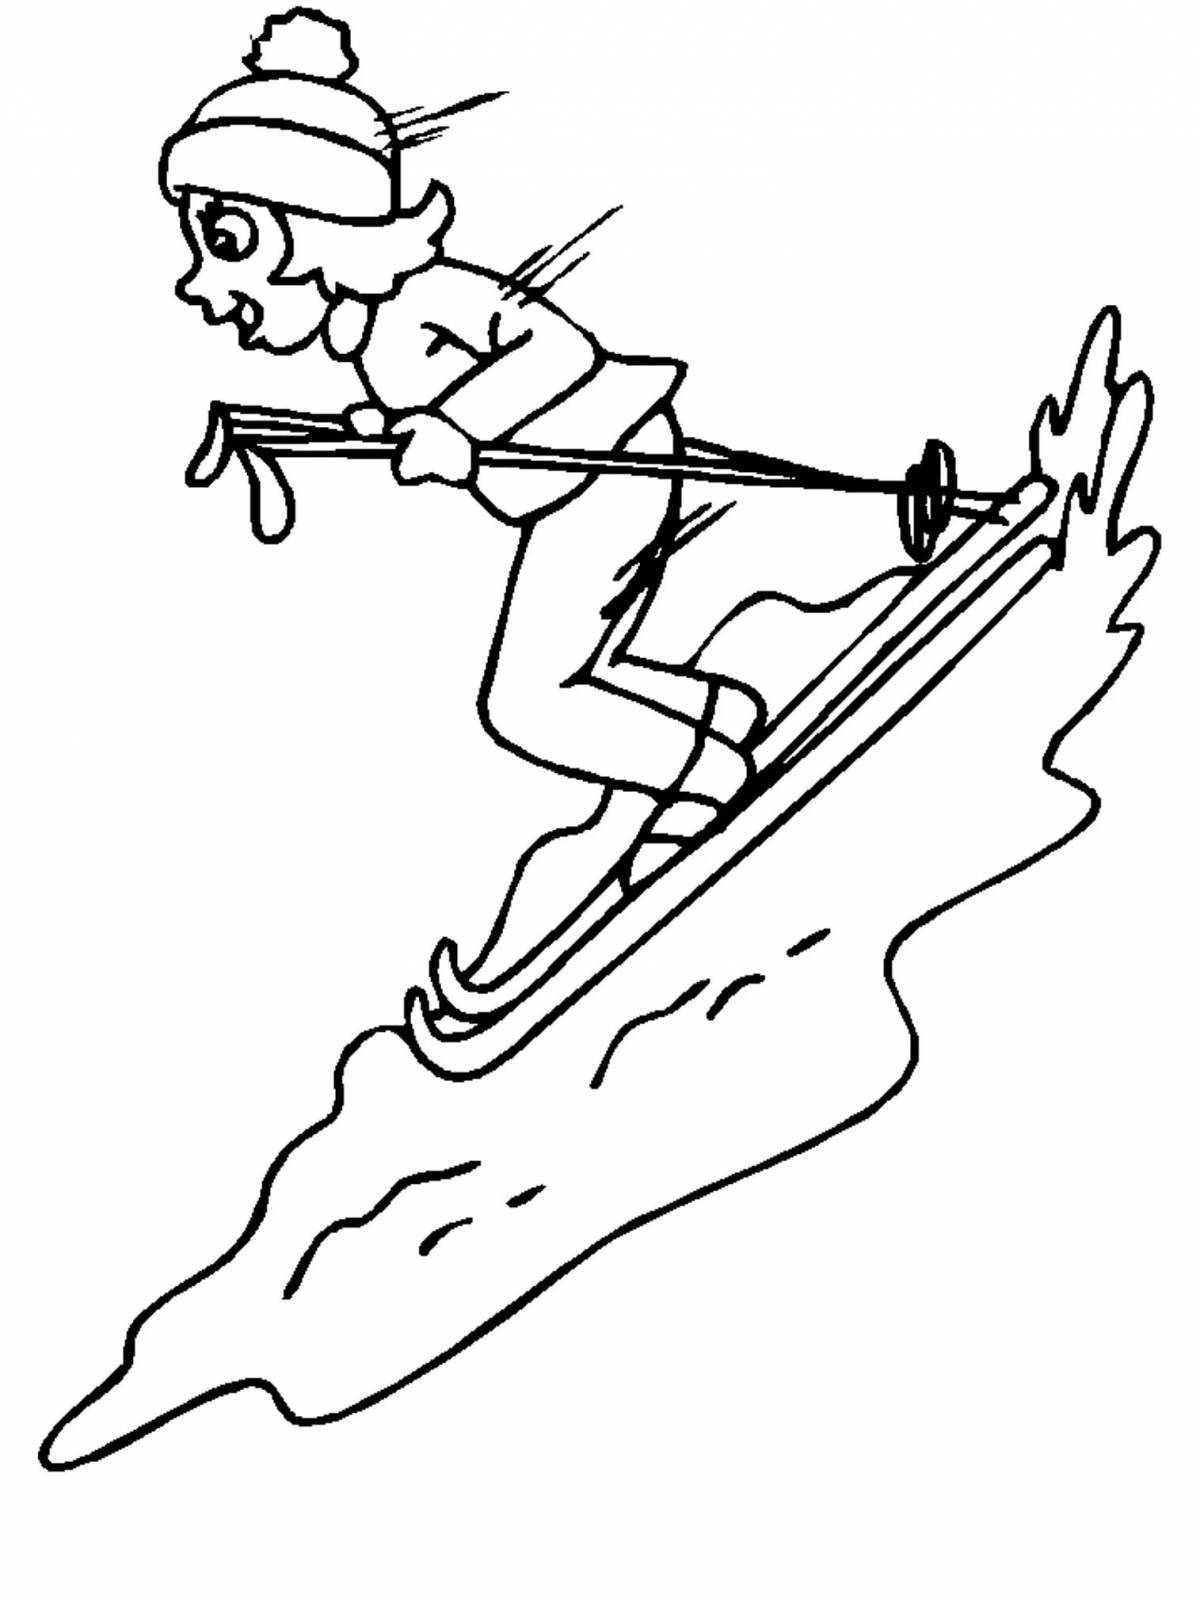 Playful skier coloring page for kids